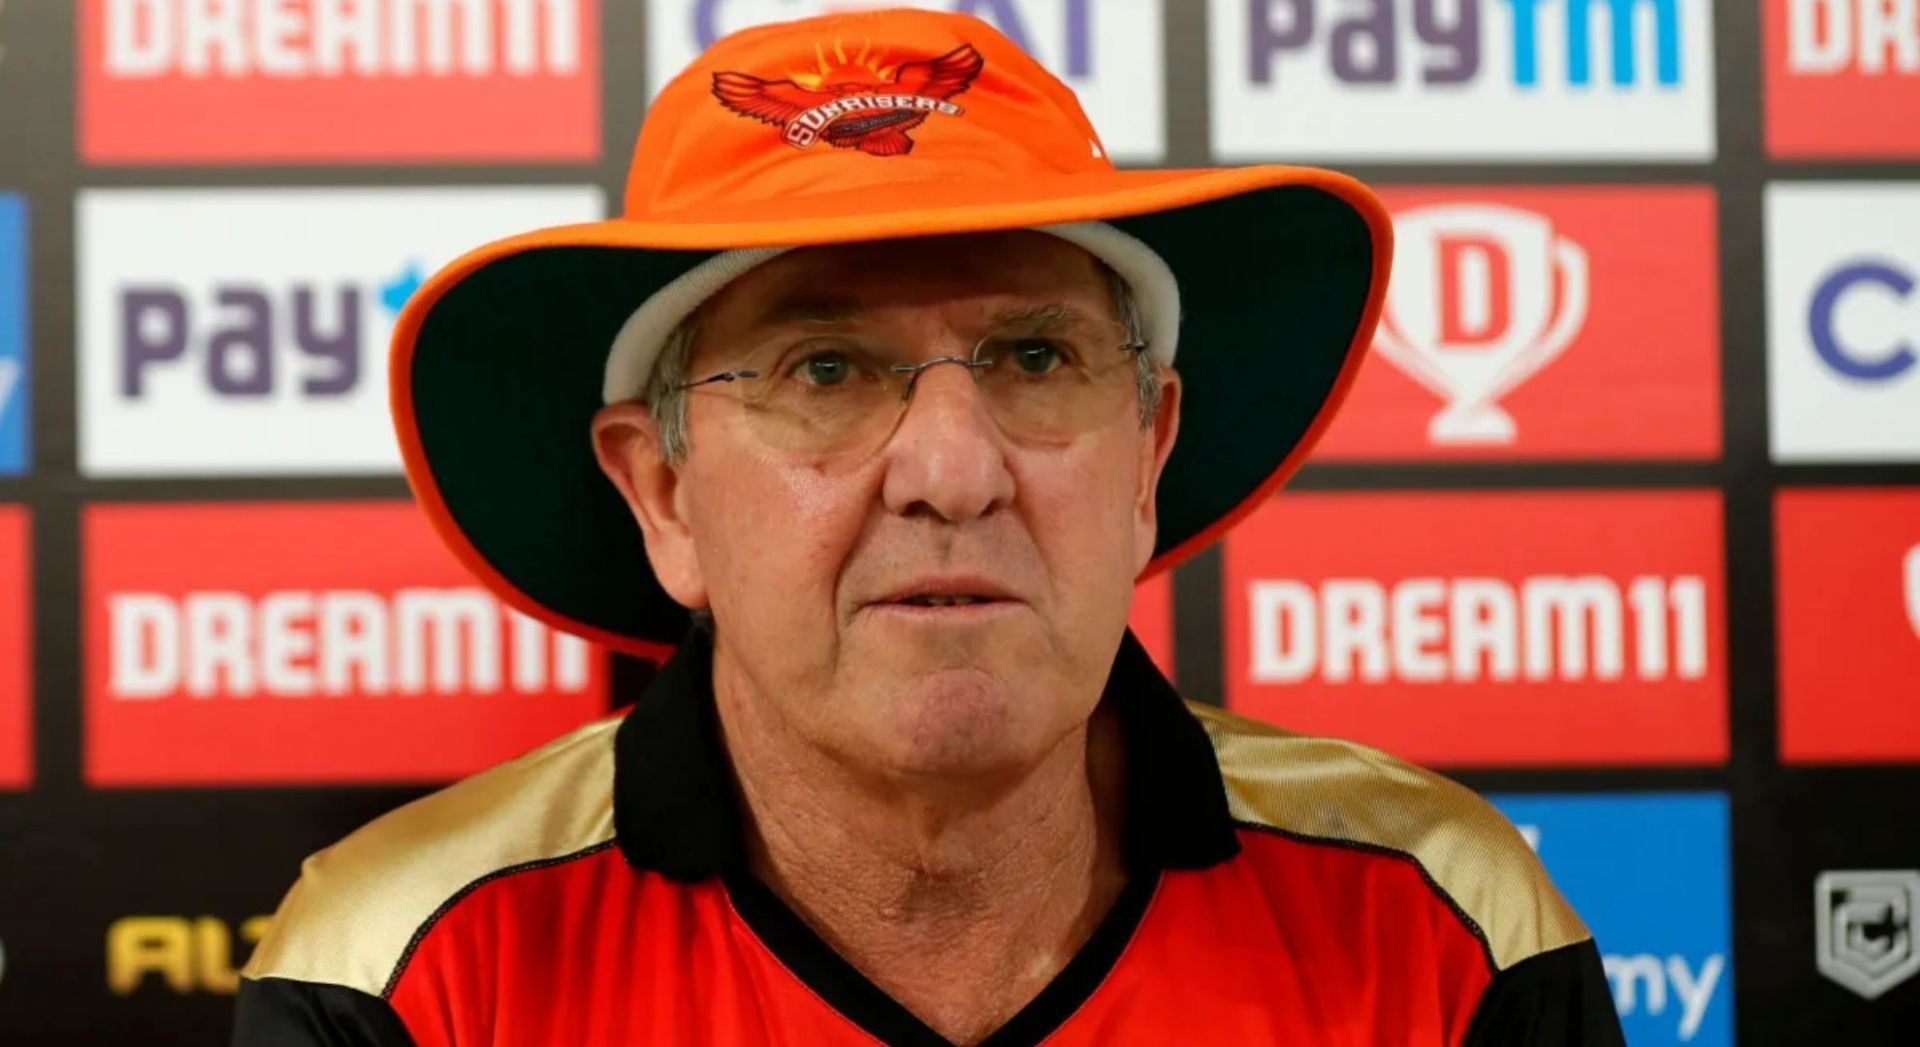 Bayliss has served as coach at SRH and KKR in IPL.